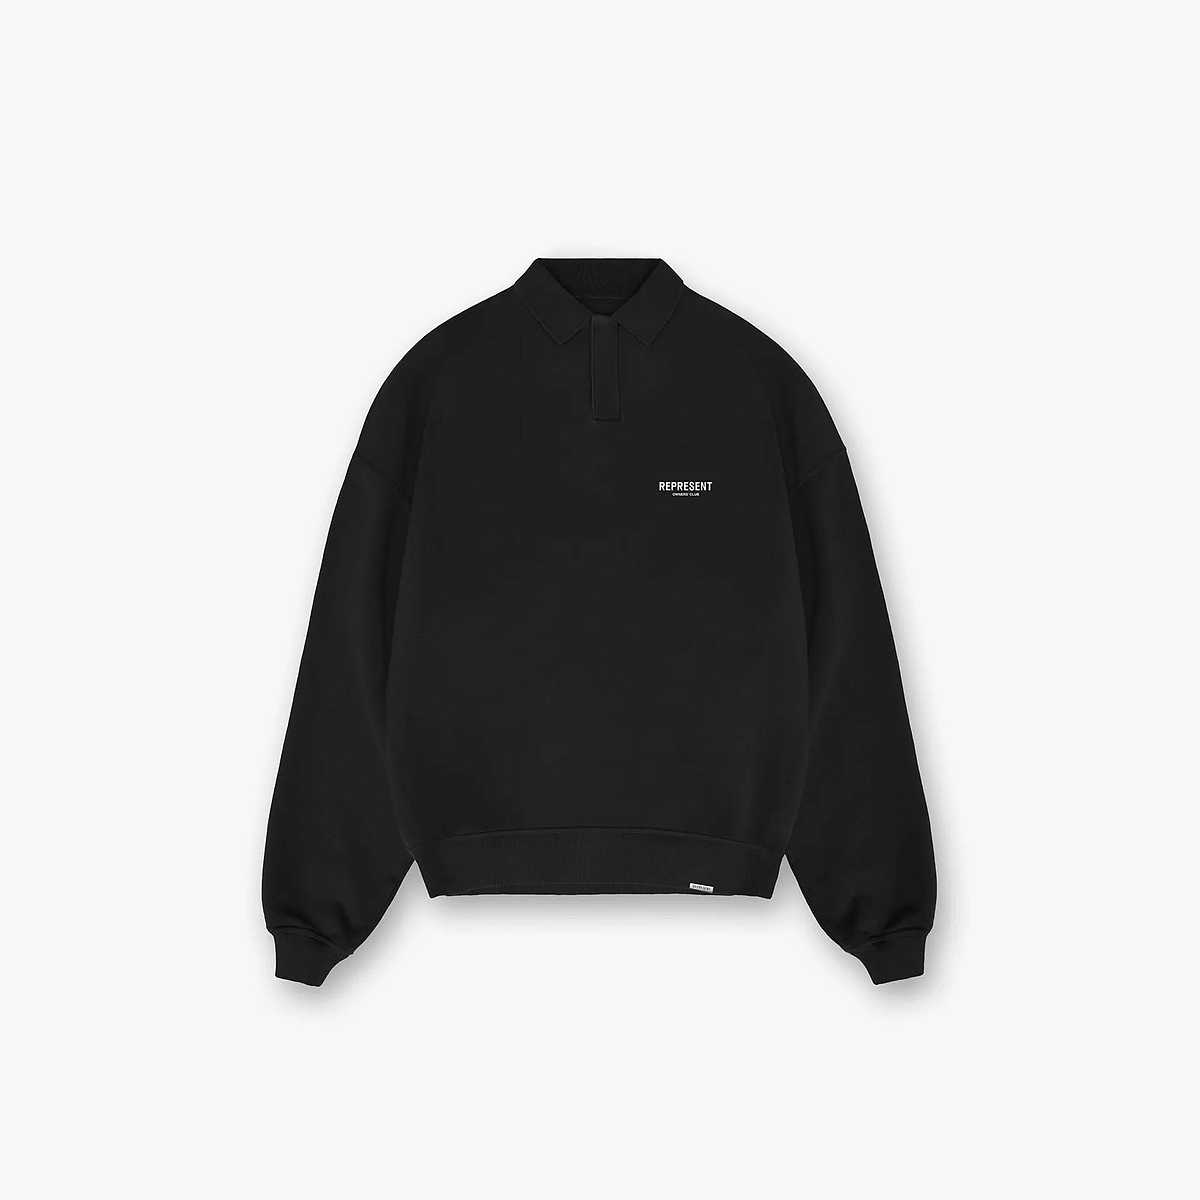 Owners' Club Long Sleeve Polo Sweater | Black | REPRESENT CLO